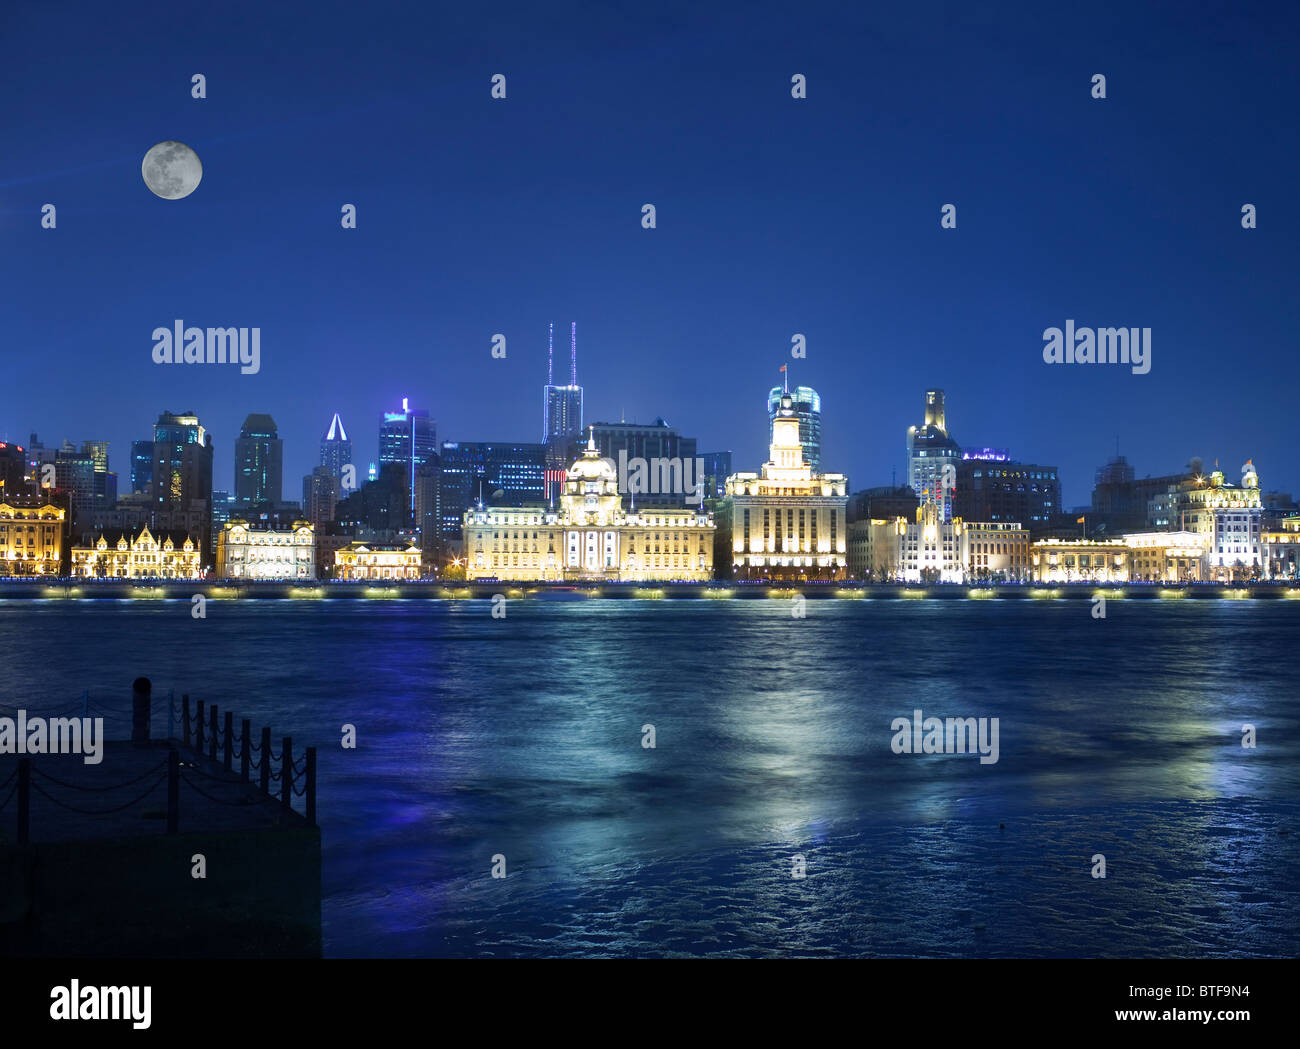 shanghai historic bund night view with a moon Stock Photo